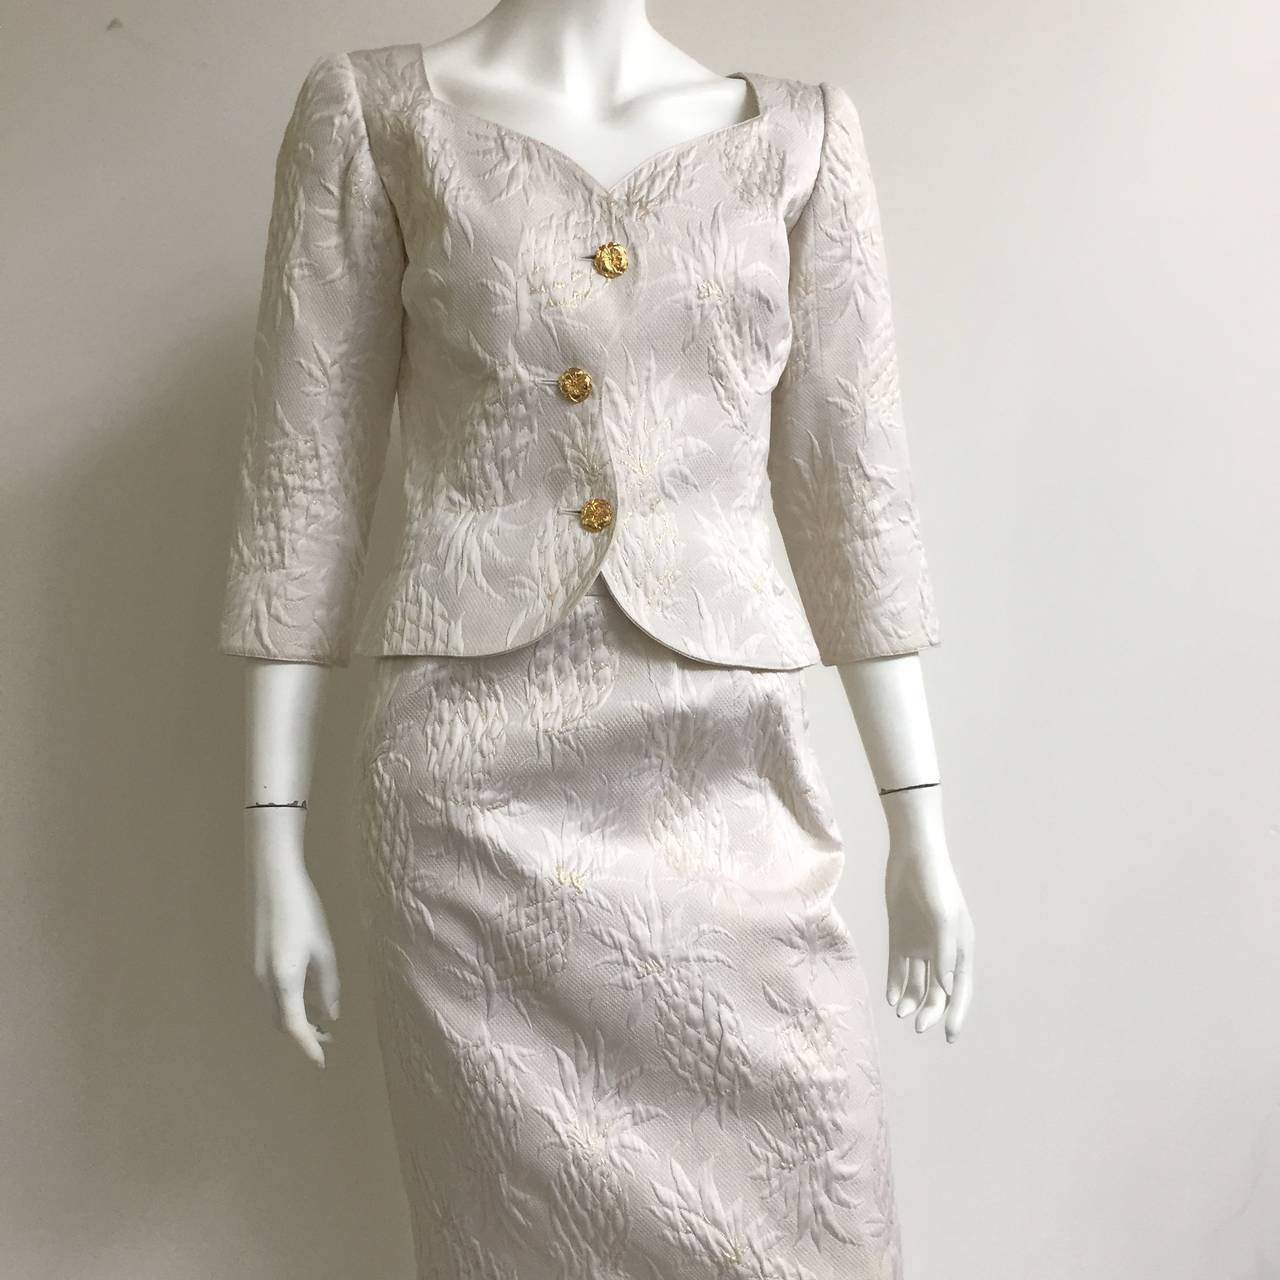 Ungaro Parallele Paris off white / cream brocade pineapple pattern with gold thread & gold buttons skirt suit size 6 made in Italy.
Measurements art:
39" bust in jacket
18" sleeve length in jacket
20" jacket length
28"